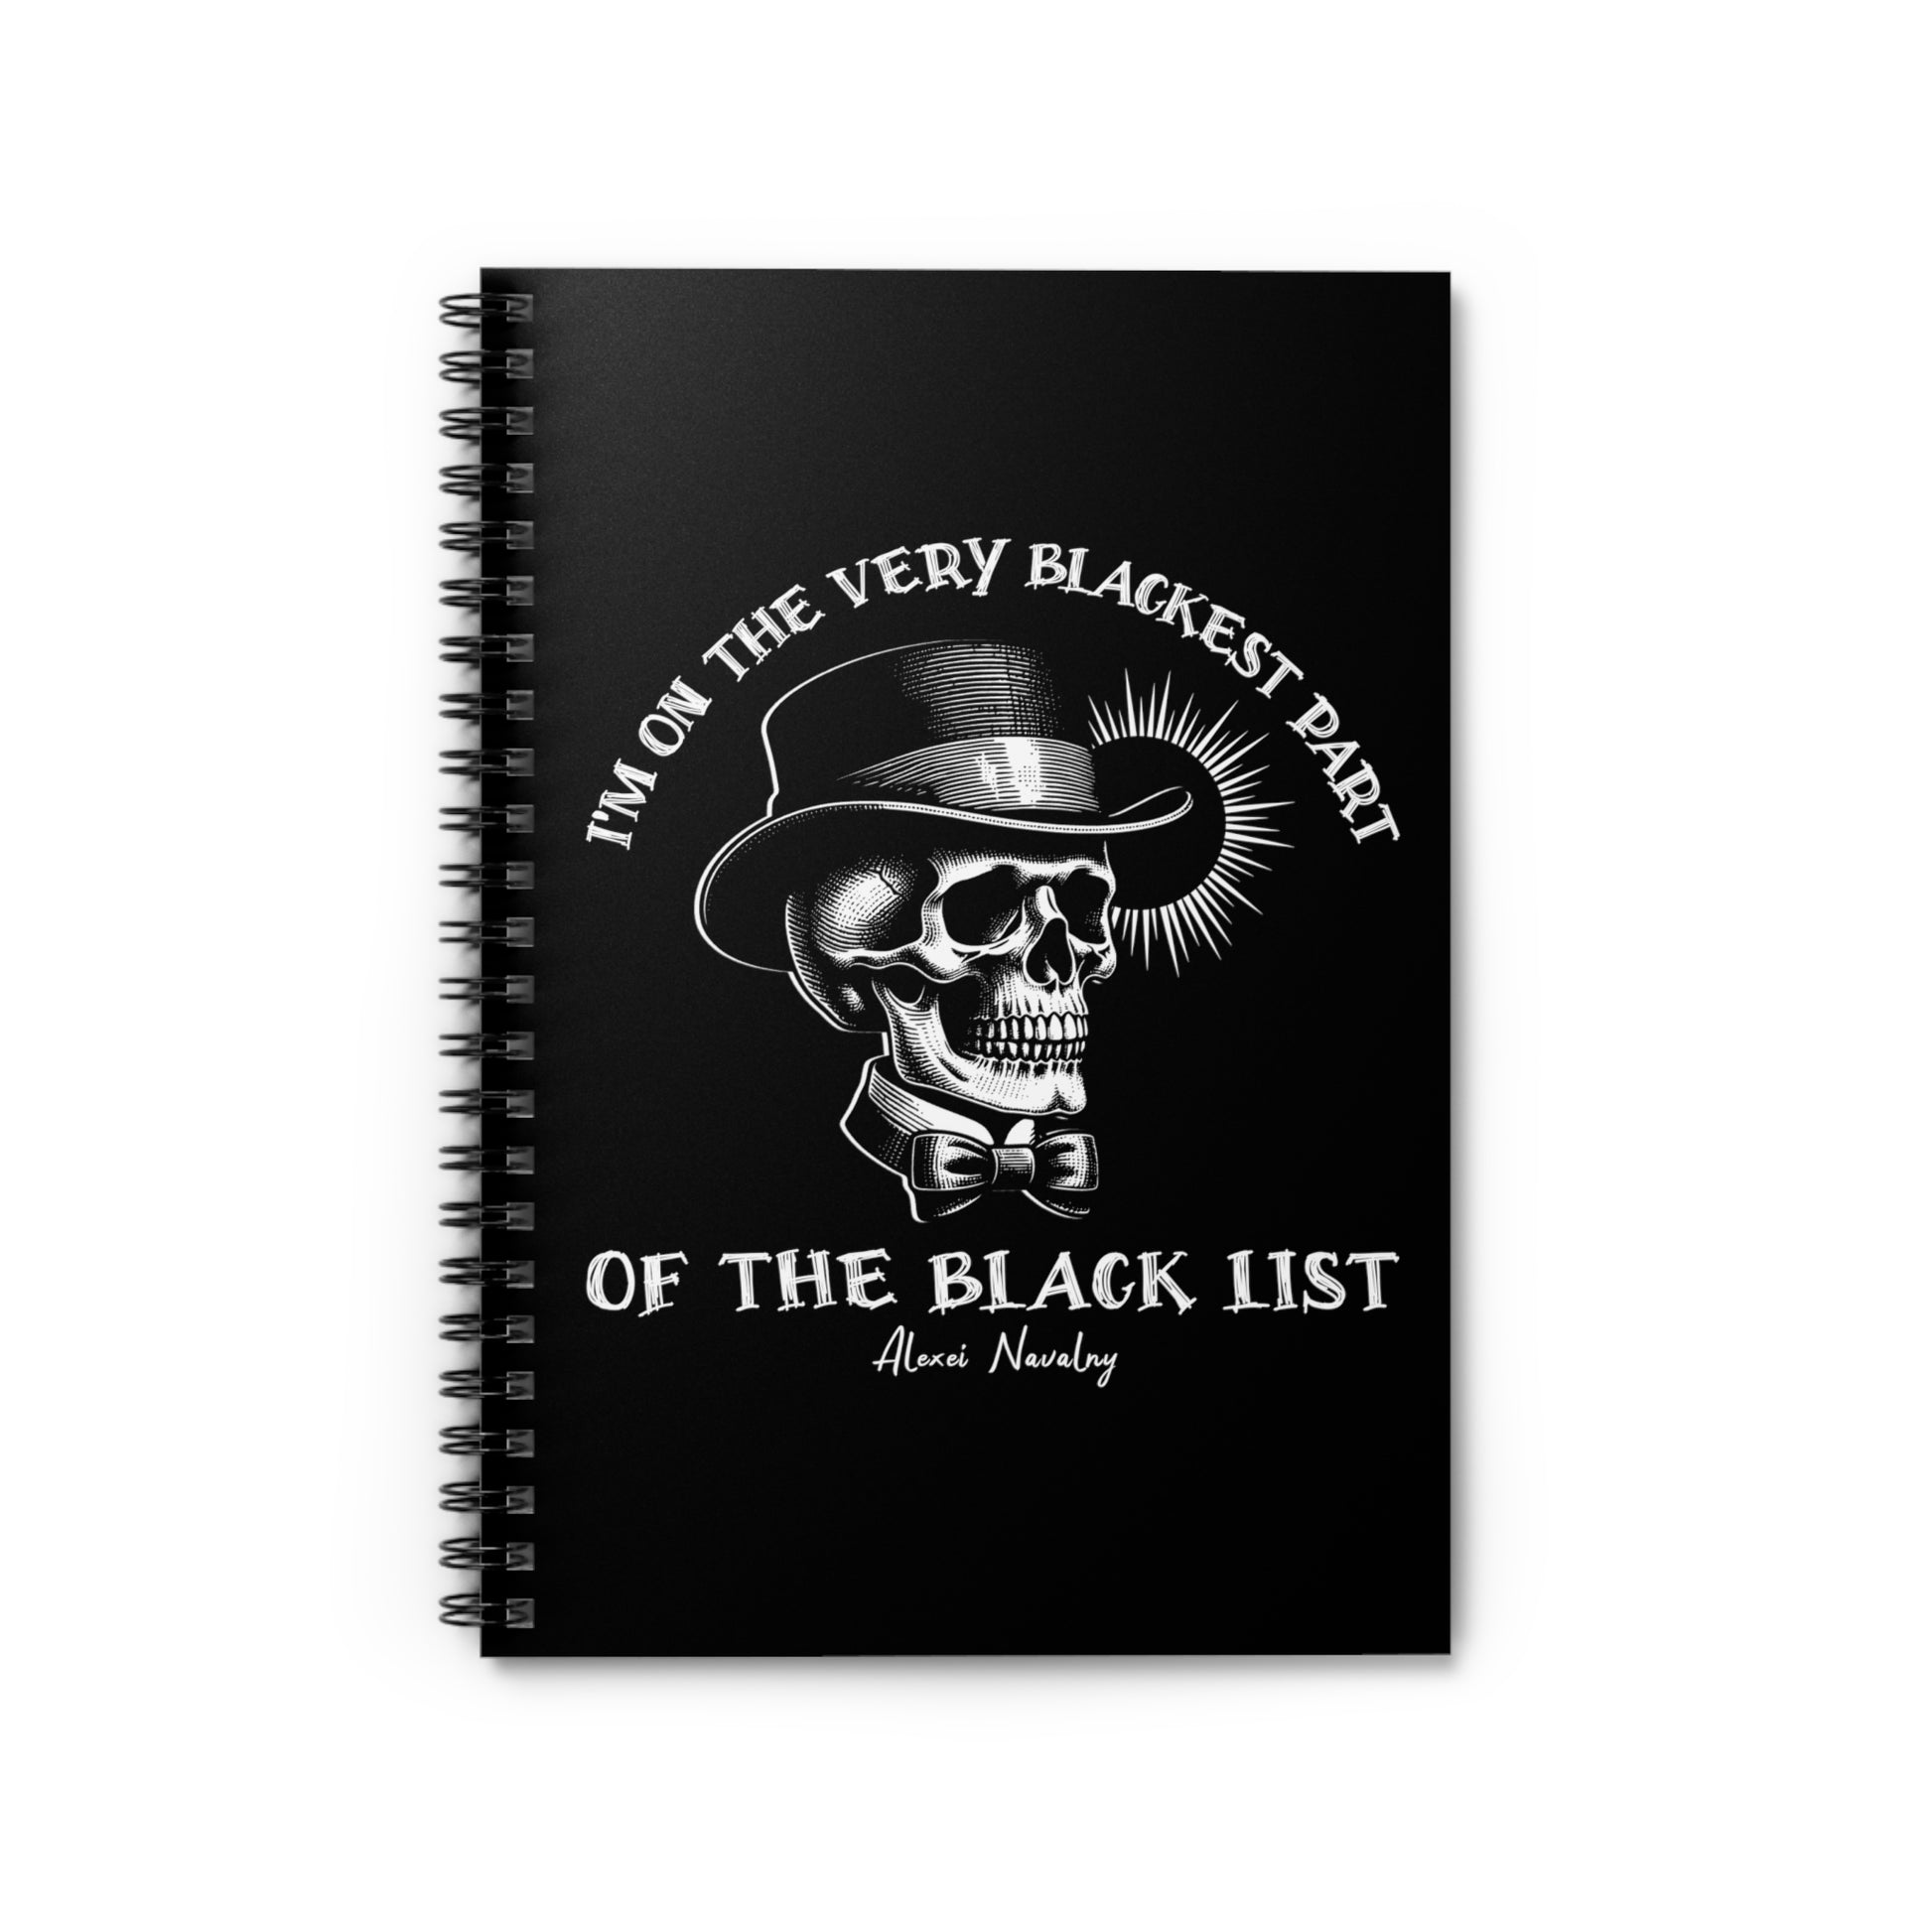 Black spiral notebook with skull design and Navalny quote that makes the perfect gift for students, writers, readers, and advocates fighting against injustice.